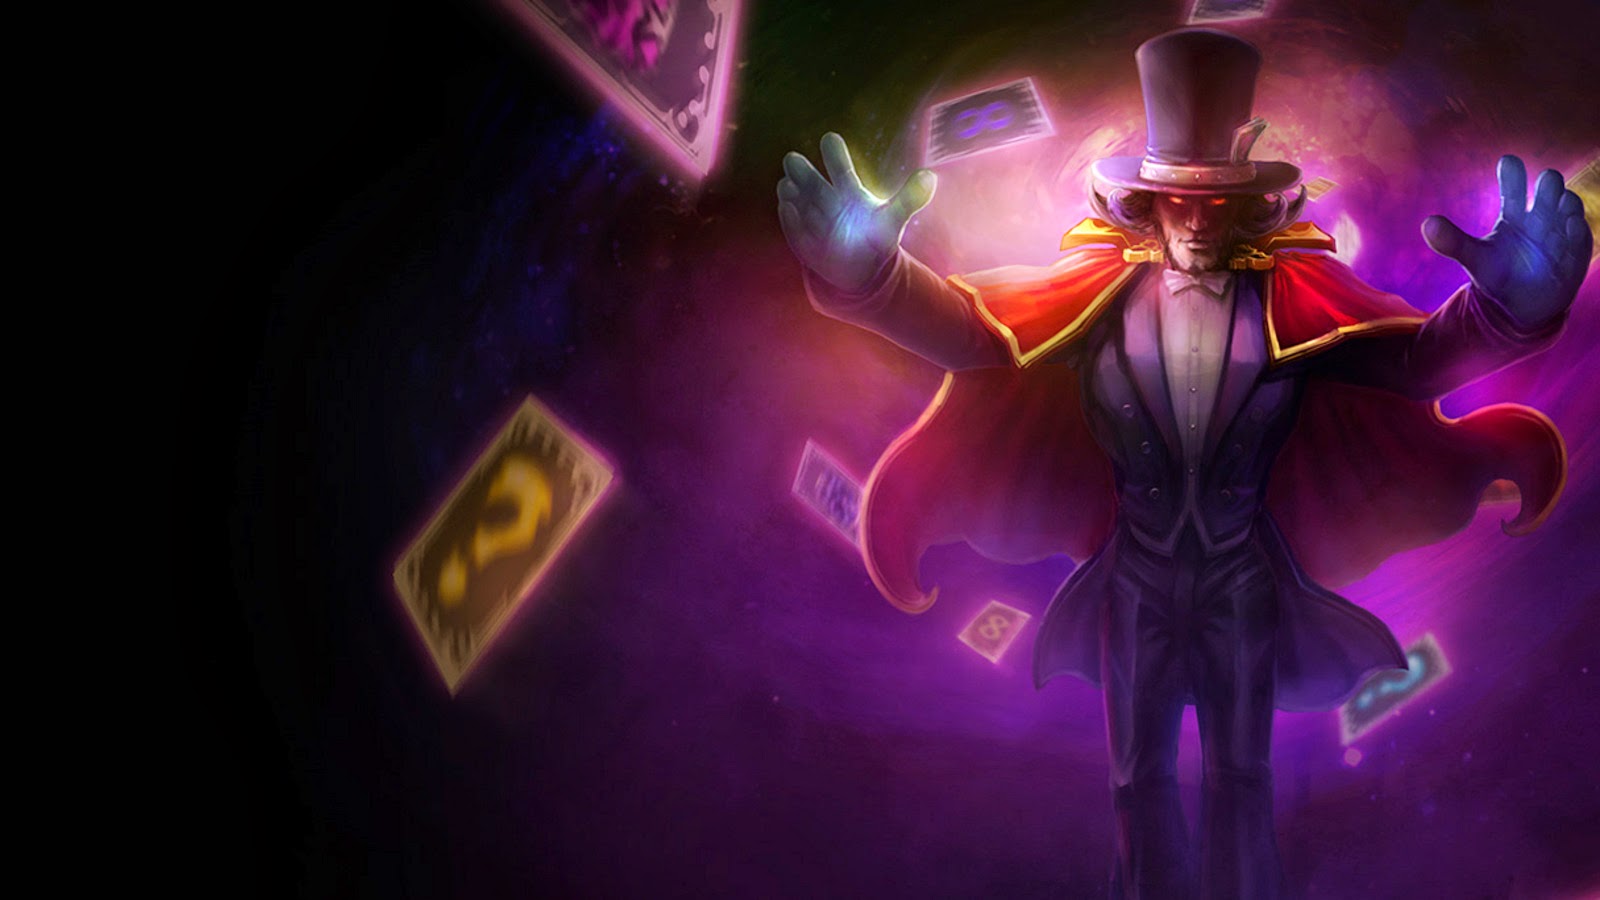 Find more Twisted Fate Desktop Backgrounds Twisted Fate LOL Champion Wallpa...